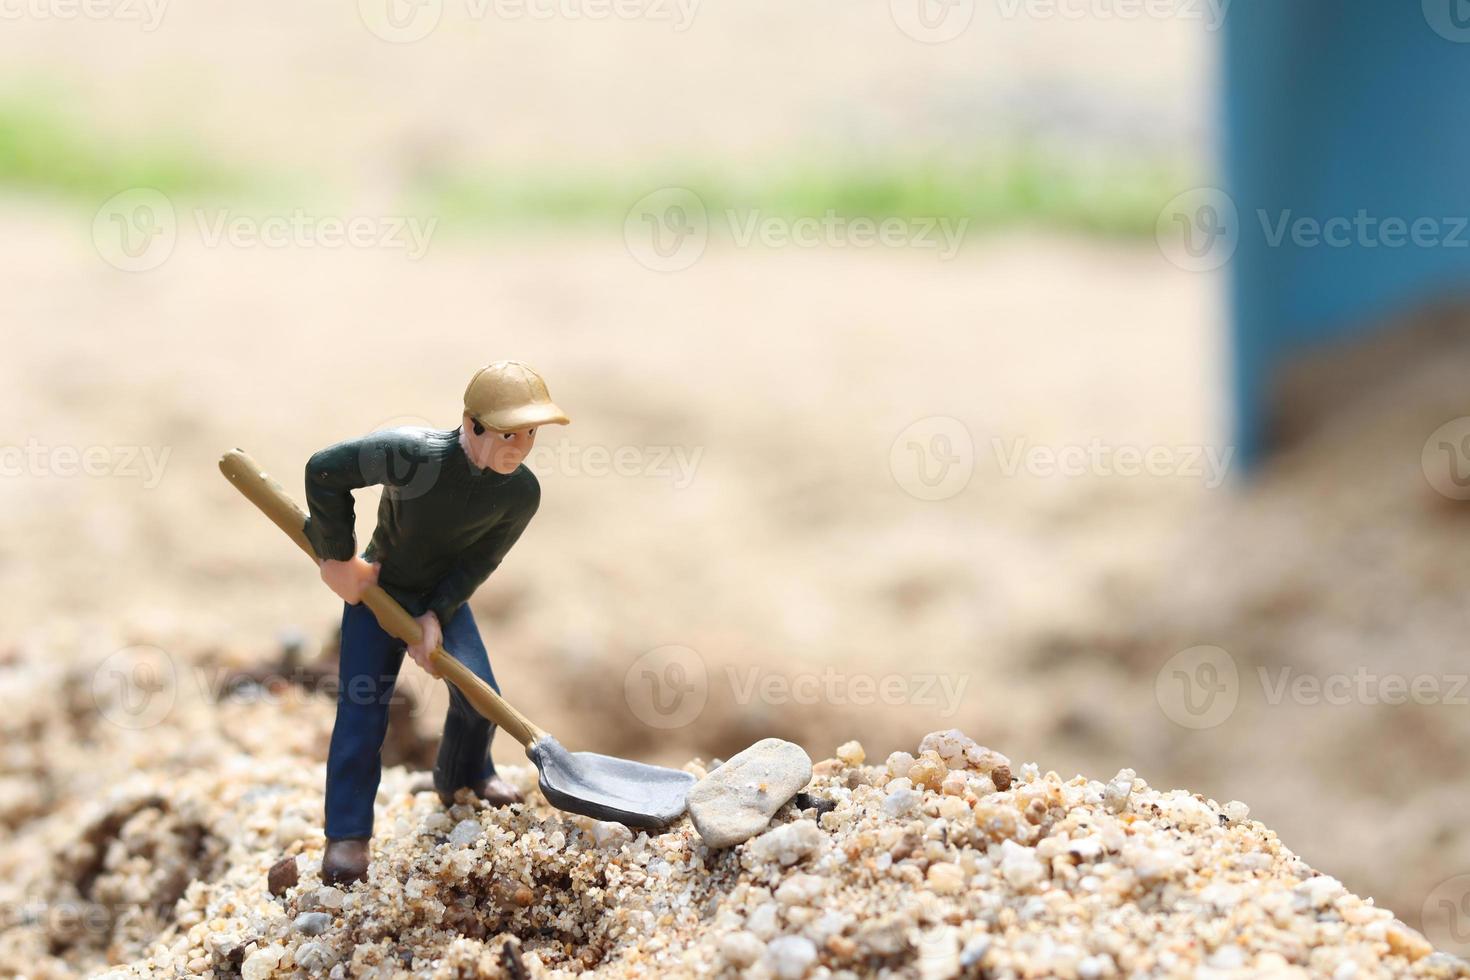 Miniature worker doll holding shovel for working, miner man at work tiny figure toy model digging ground or gardening photo